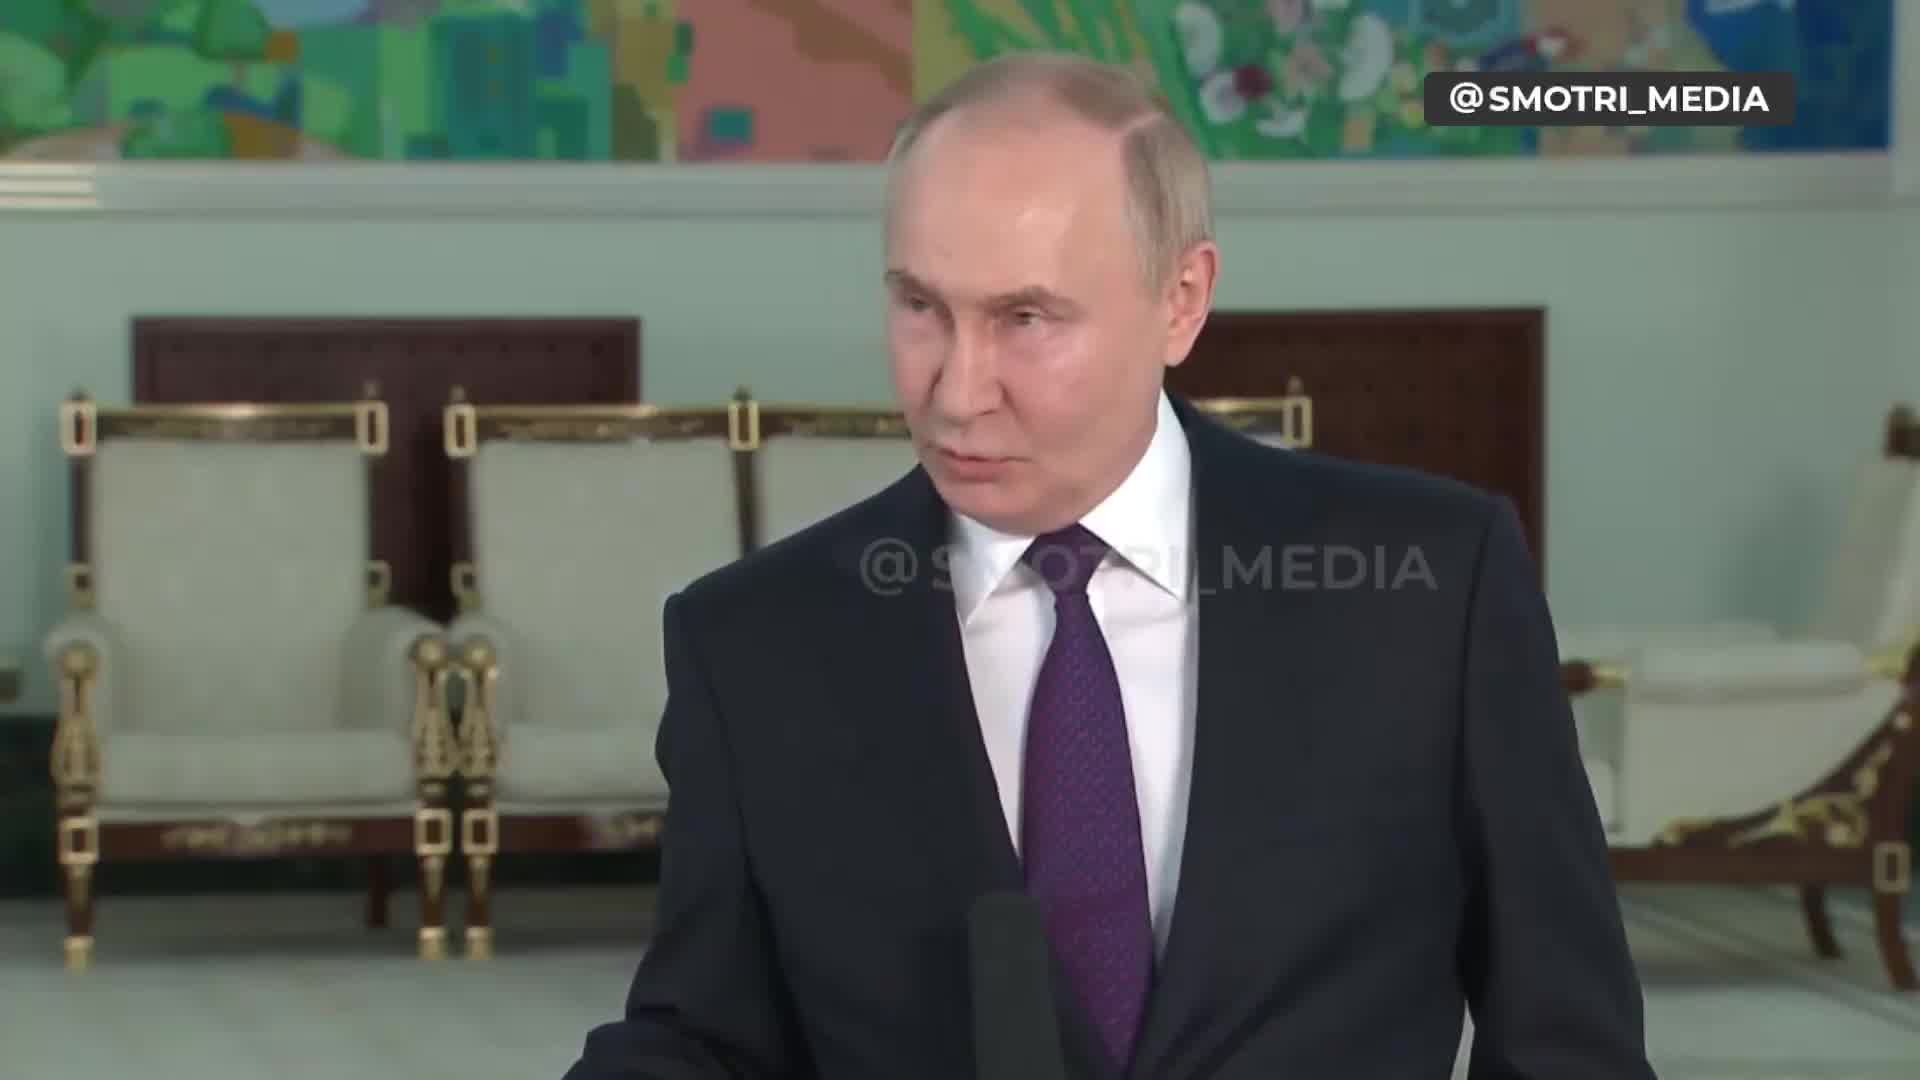 Putin vows Russia will do what they've planned no matter what troops will be in Ukraine